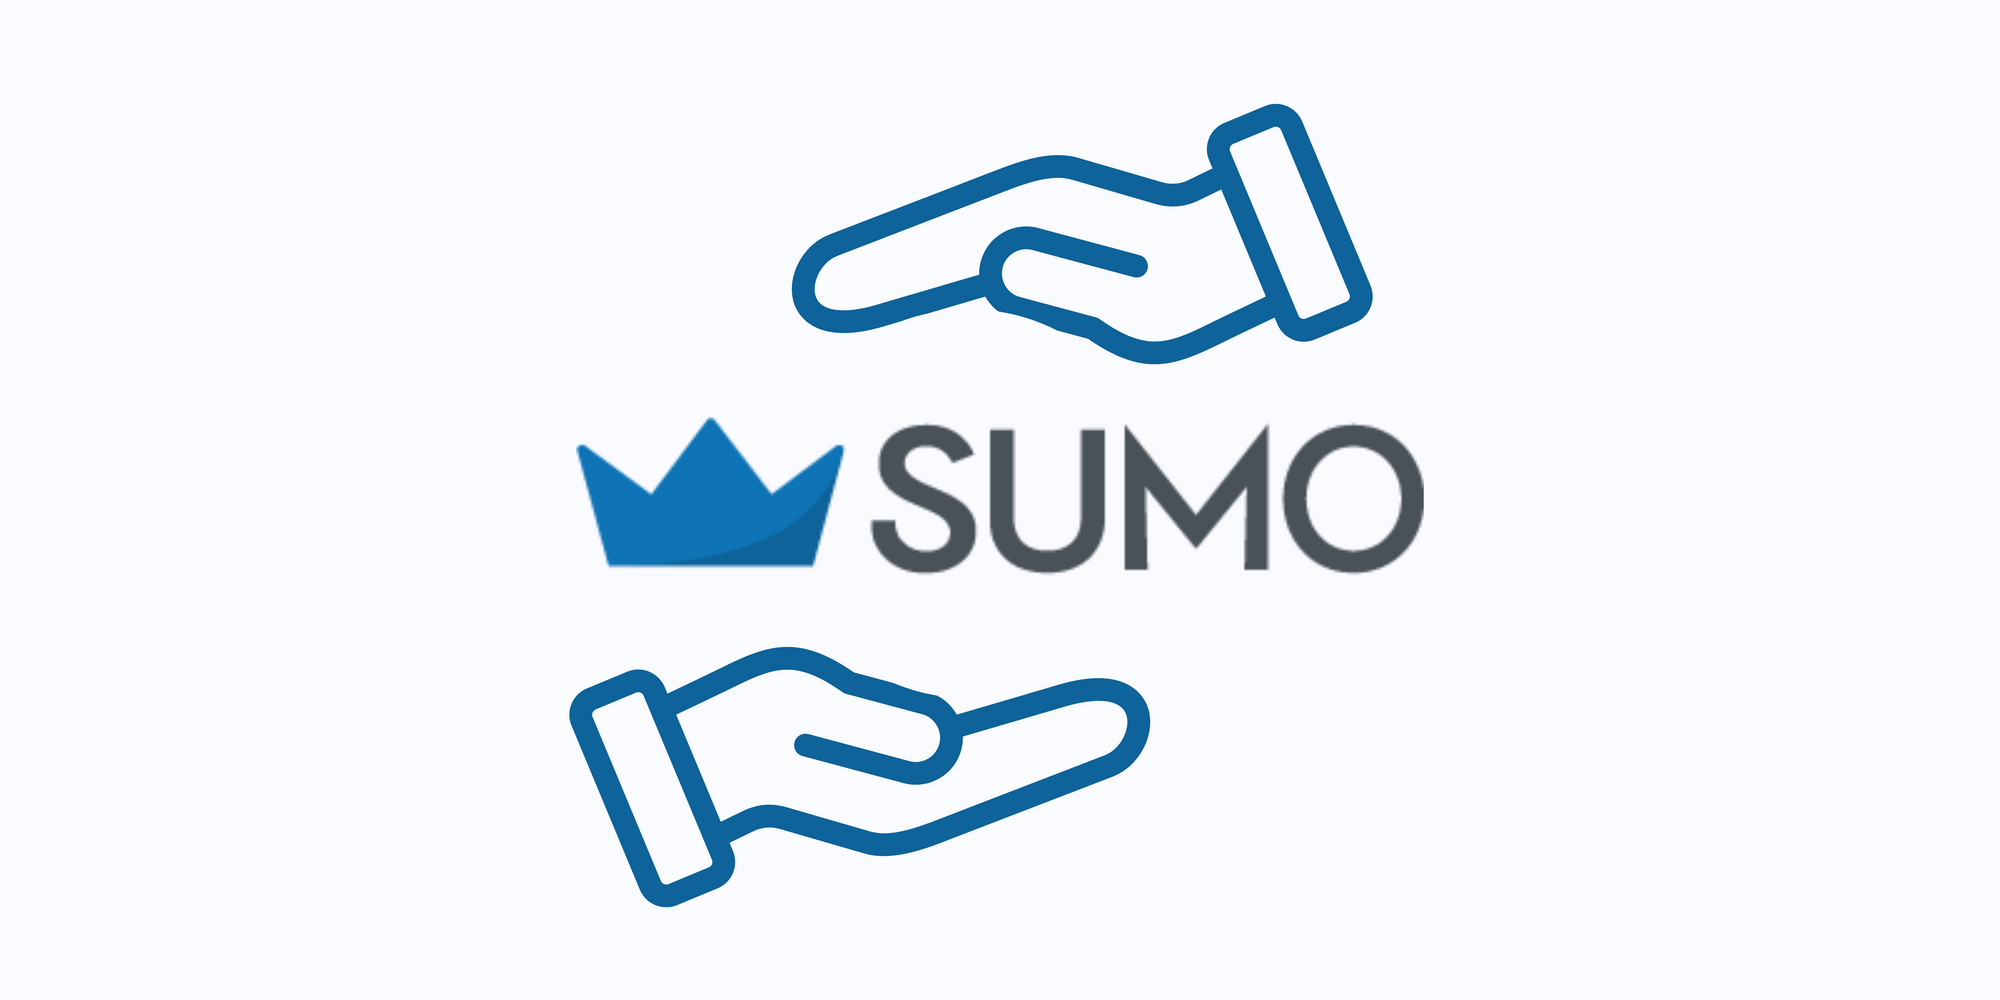 Two hands holding Sumo icon without touching on blue background